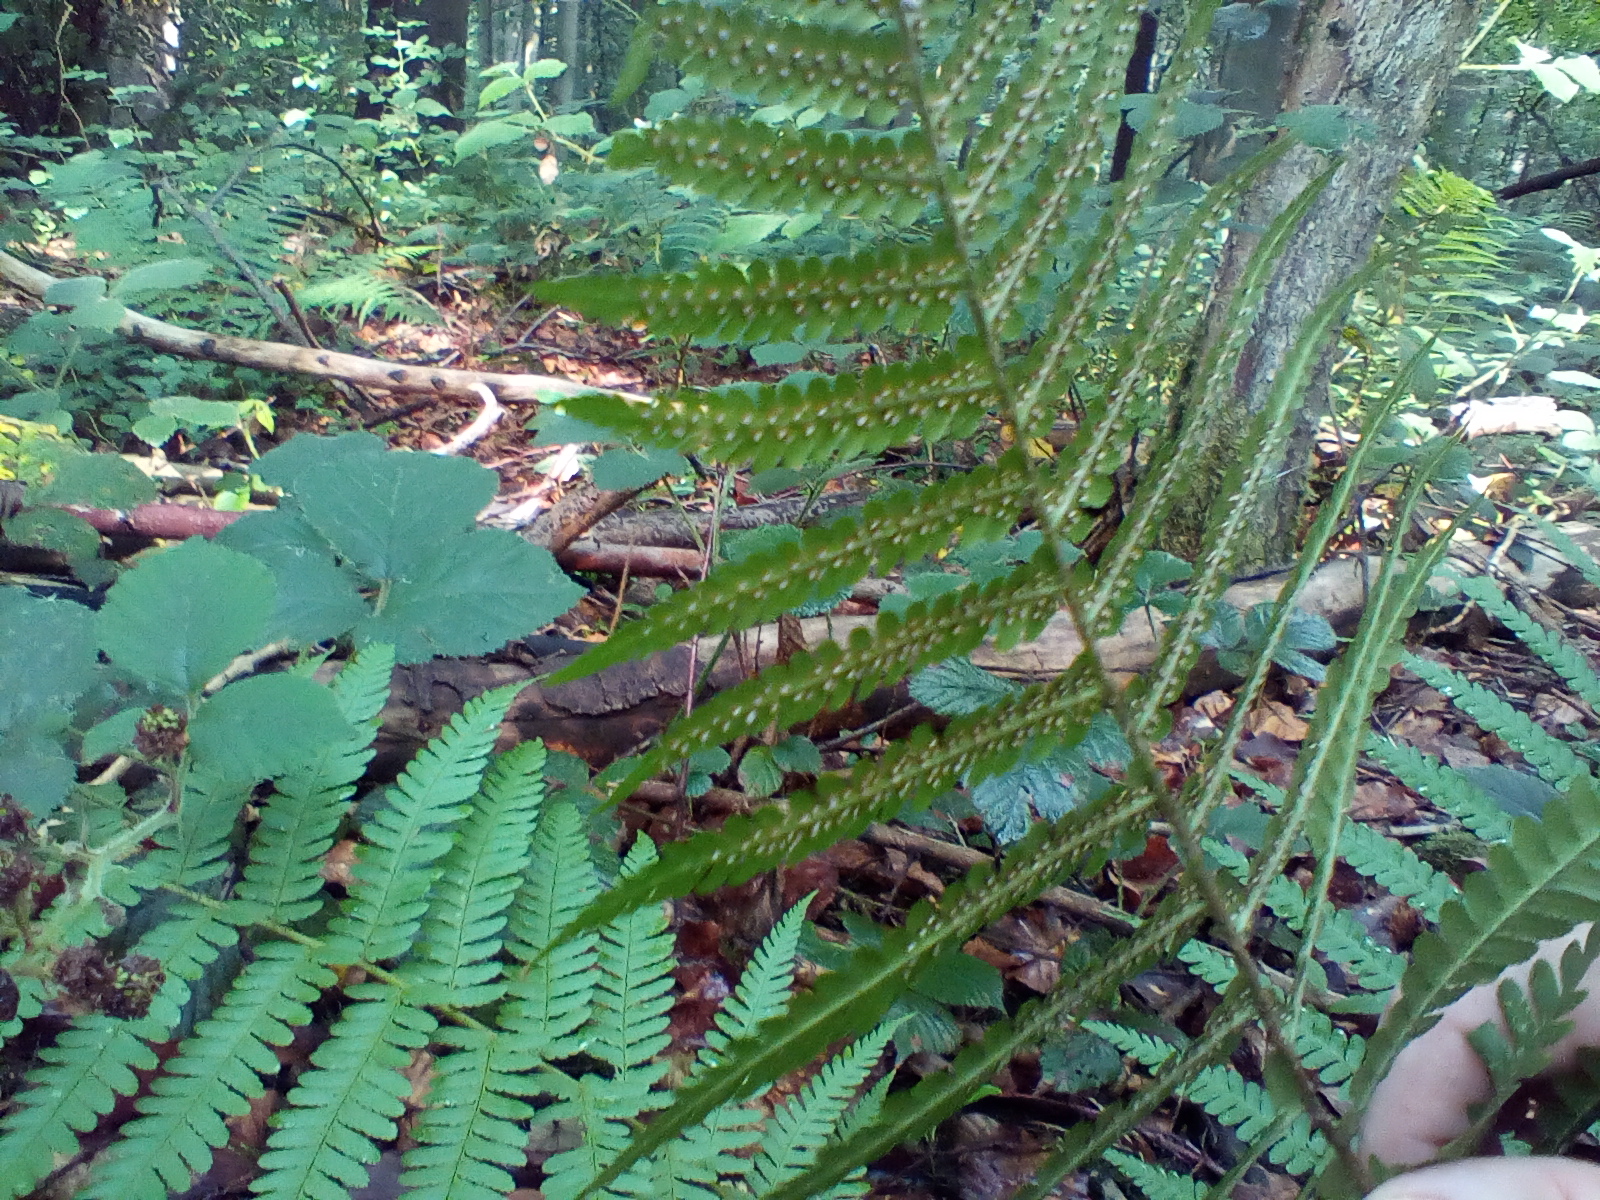 A photo of sori on a wood fern from a far distance.